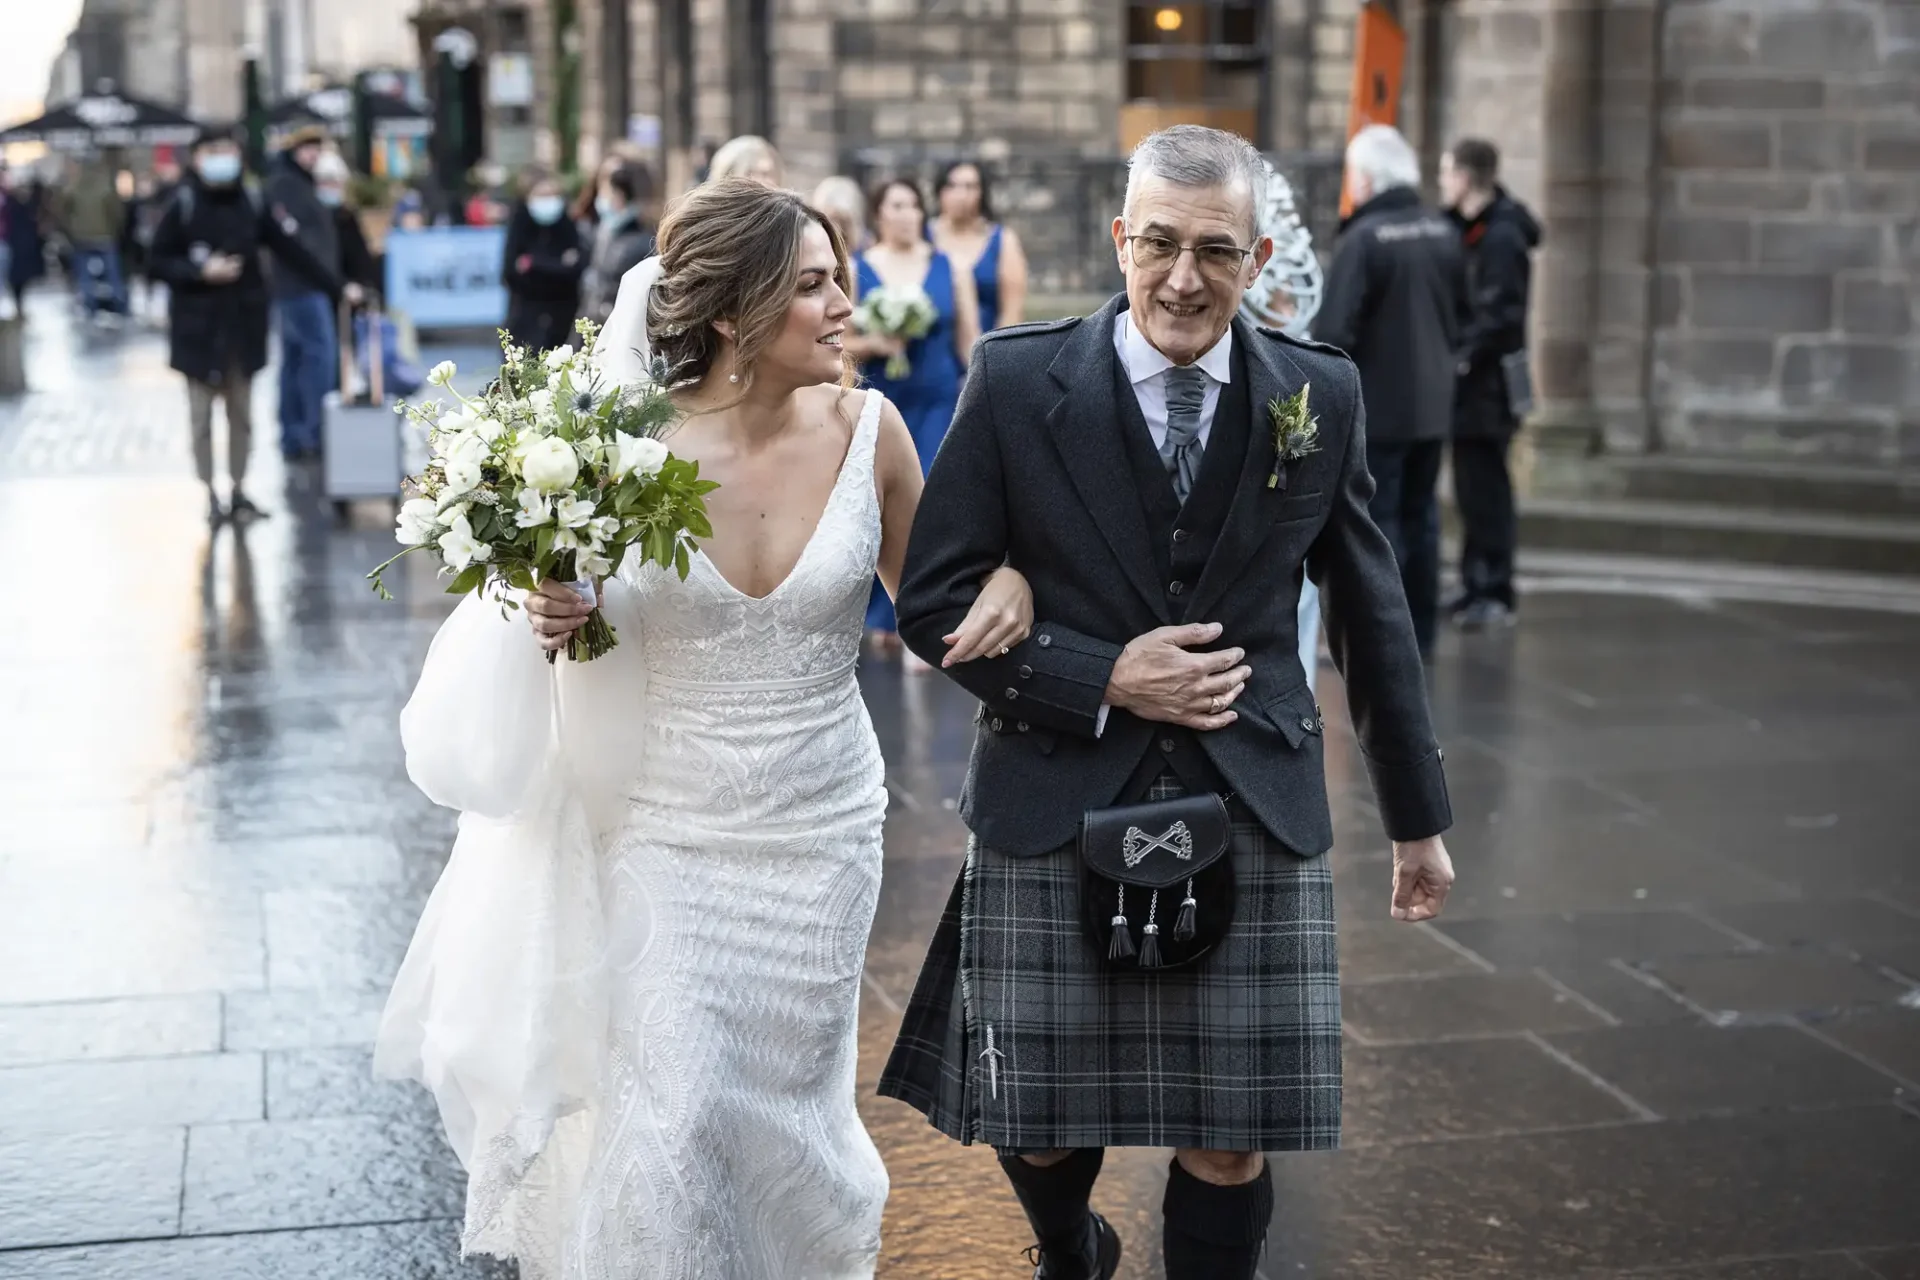 A bride in a white dress walks down a wet street with an older man in a kilt and sporran, both smiling joyfully.